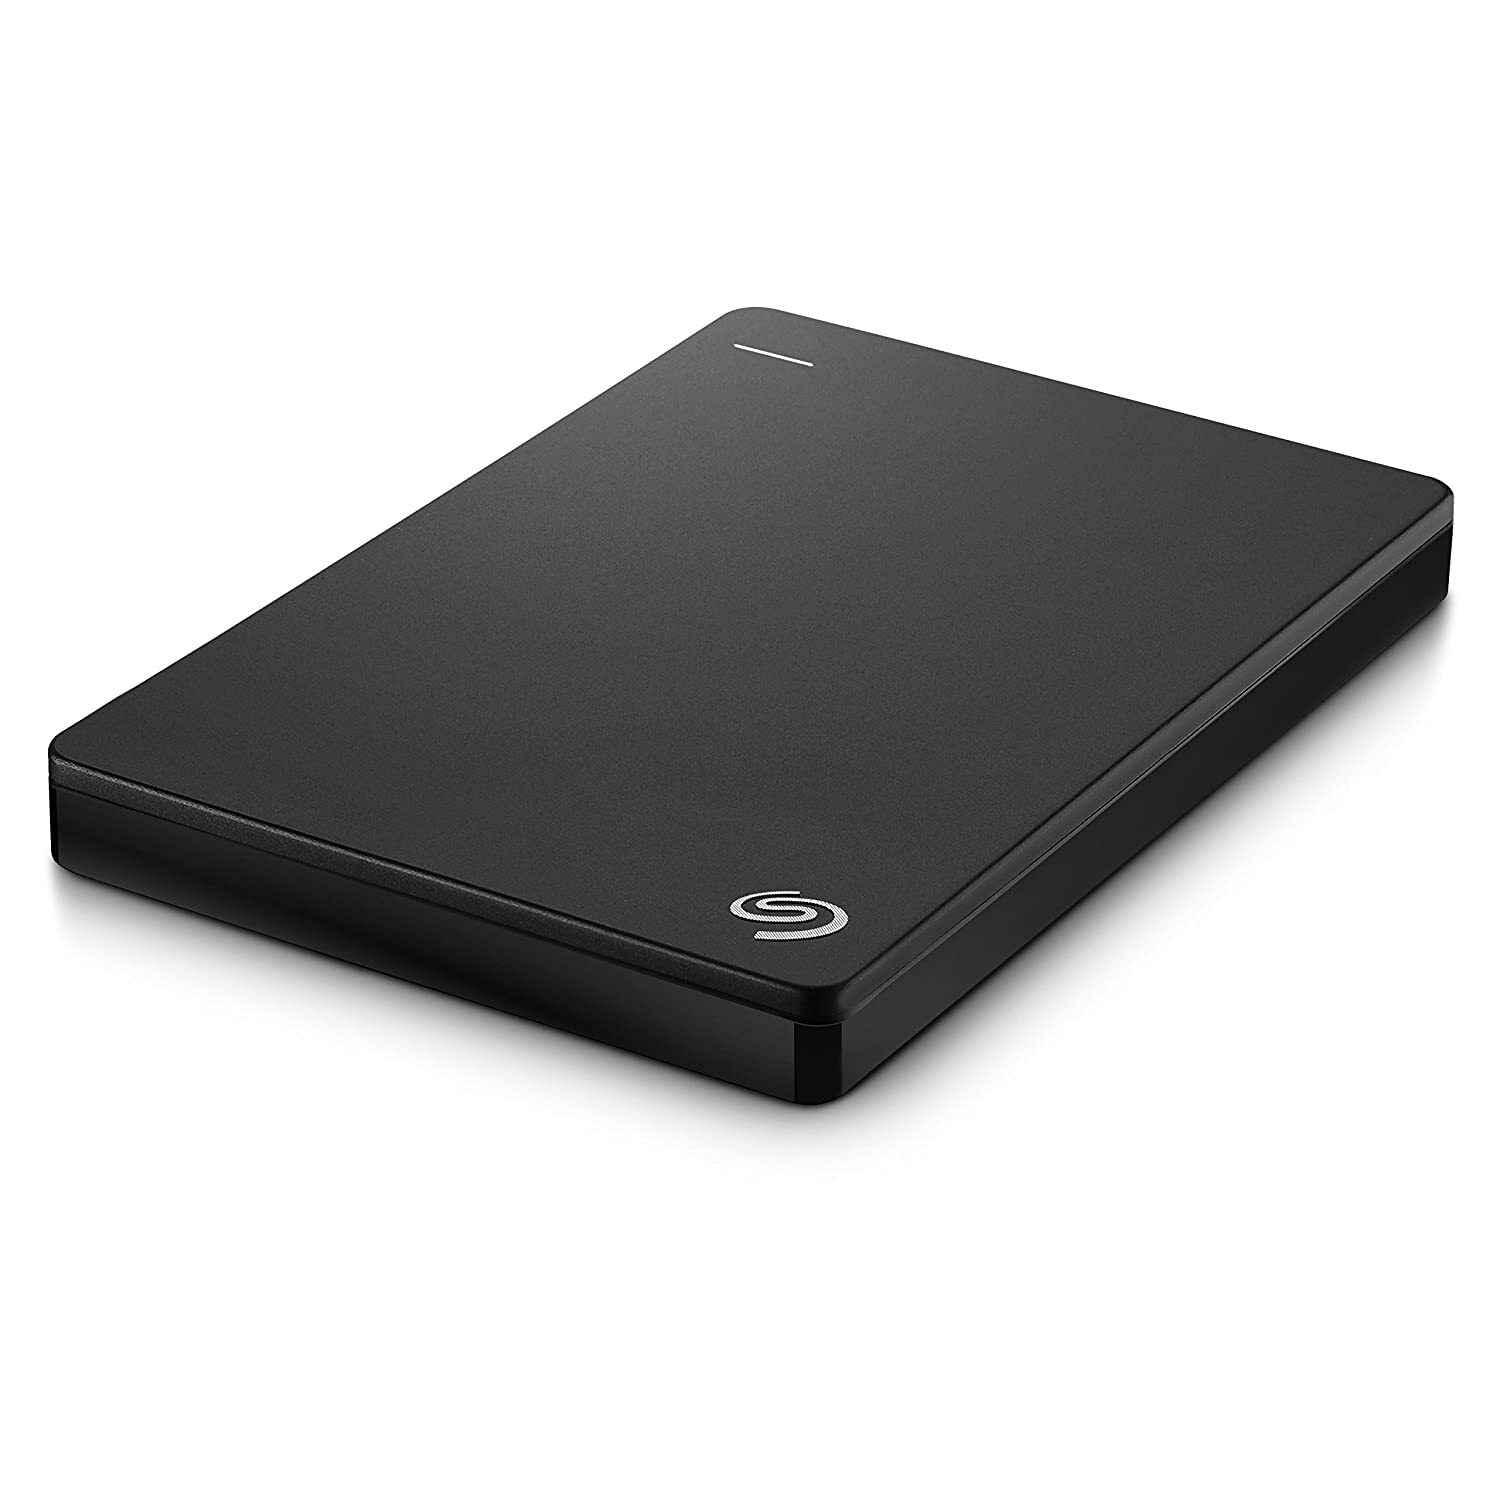 Seagate 2TB Backup Plus Slim (Black) USB 3.0 External Hard Drive for PC/Mac with 2 Months Free Adobe Photography Plan